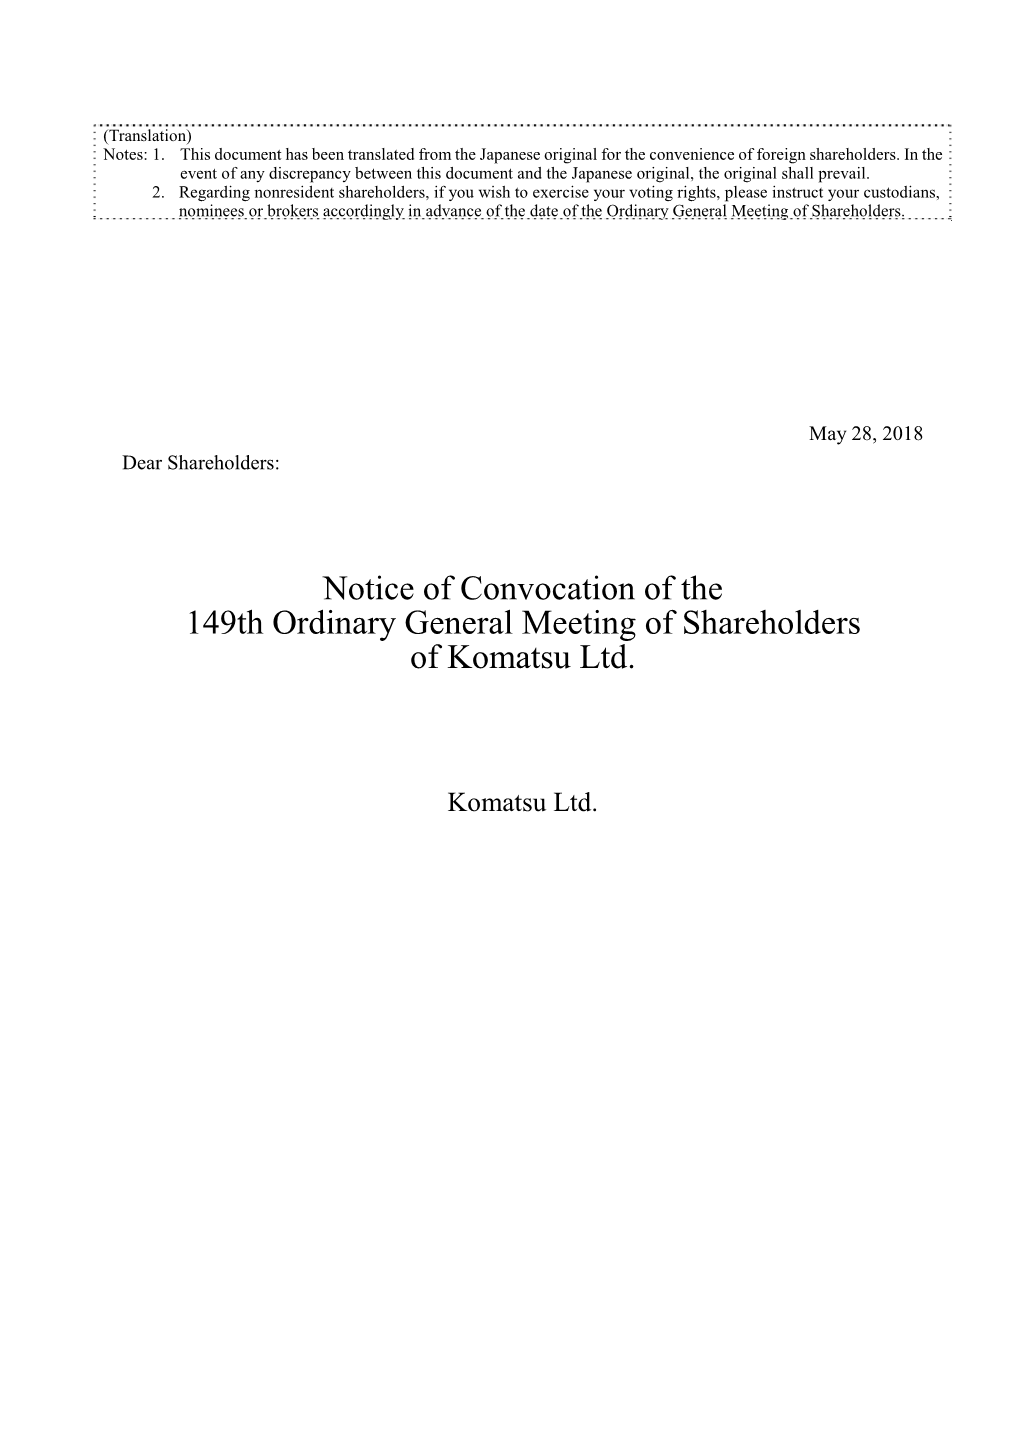 Notice of Convocation of the 149Th Ordinary General Meeting of Shareholders of Komatsu Ltd